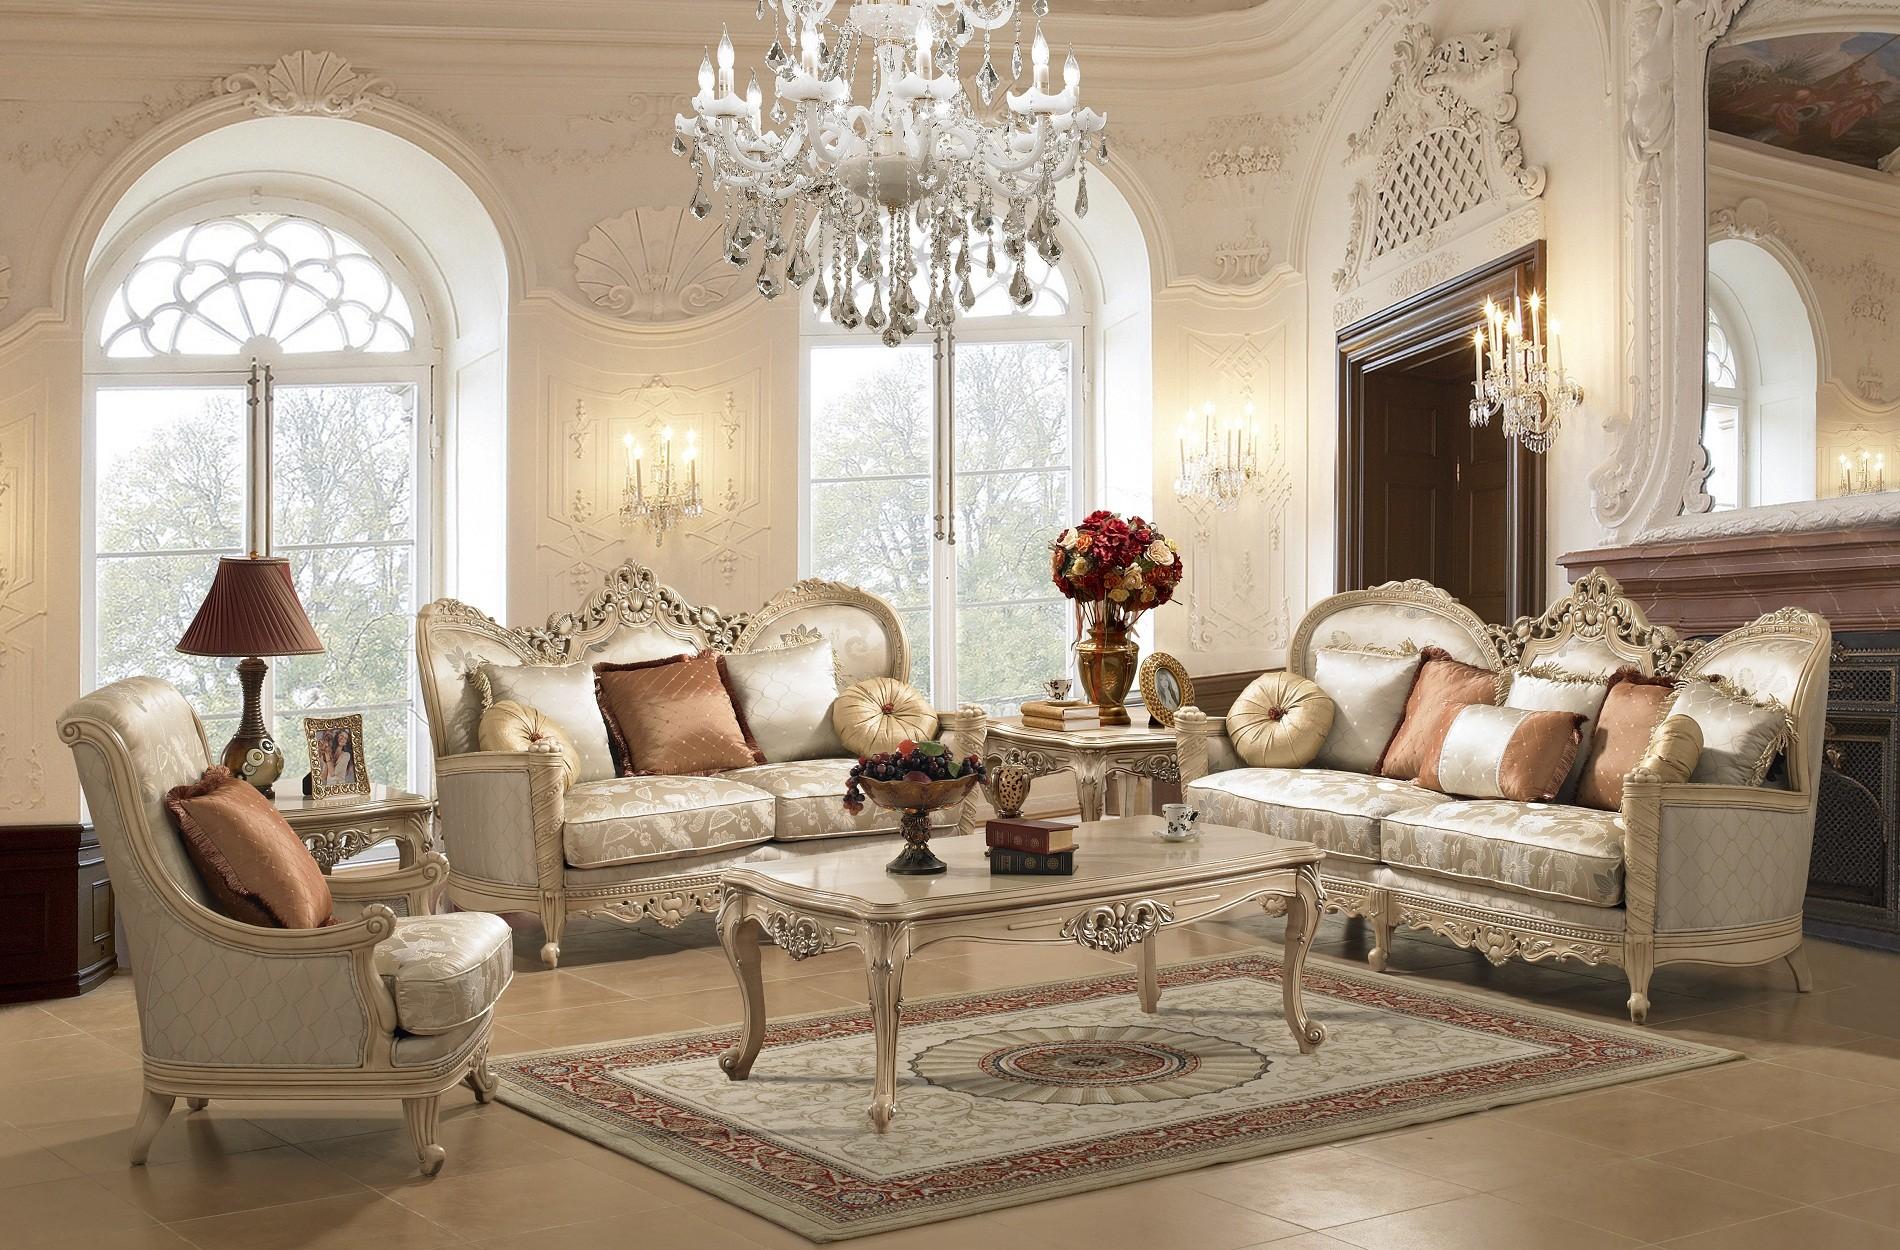 Elegant Home Decor: Timeless Style And Refined Comfort